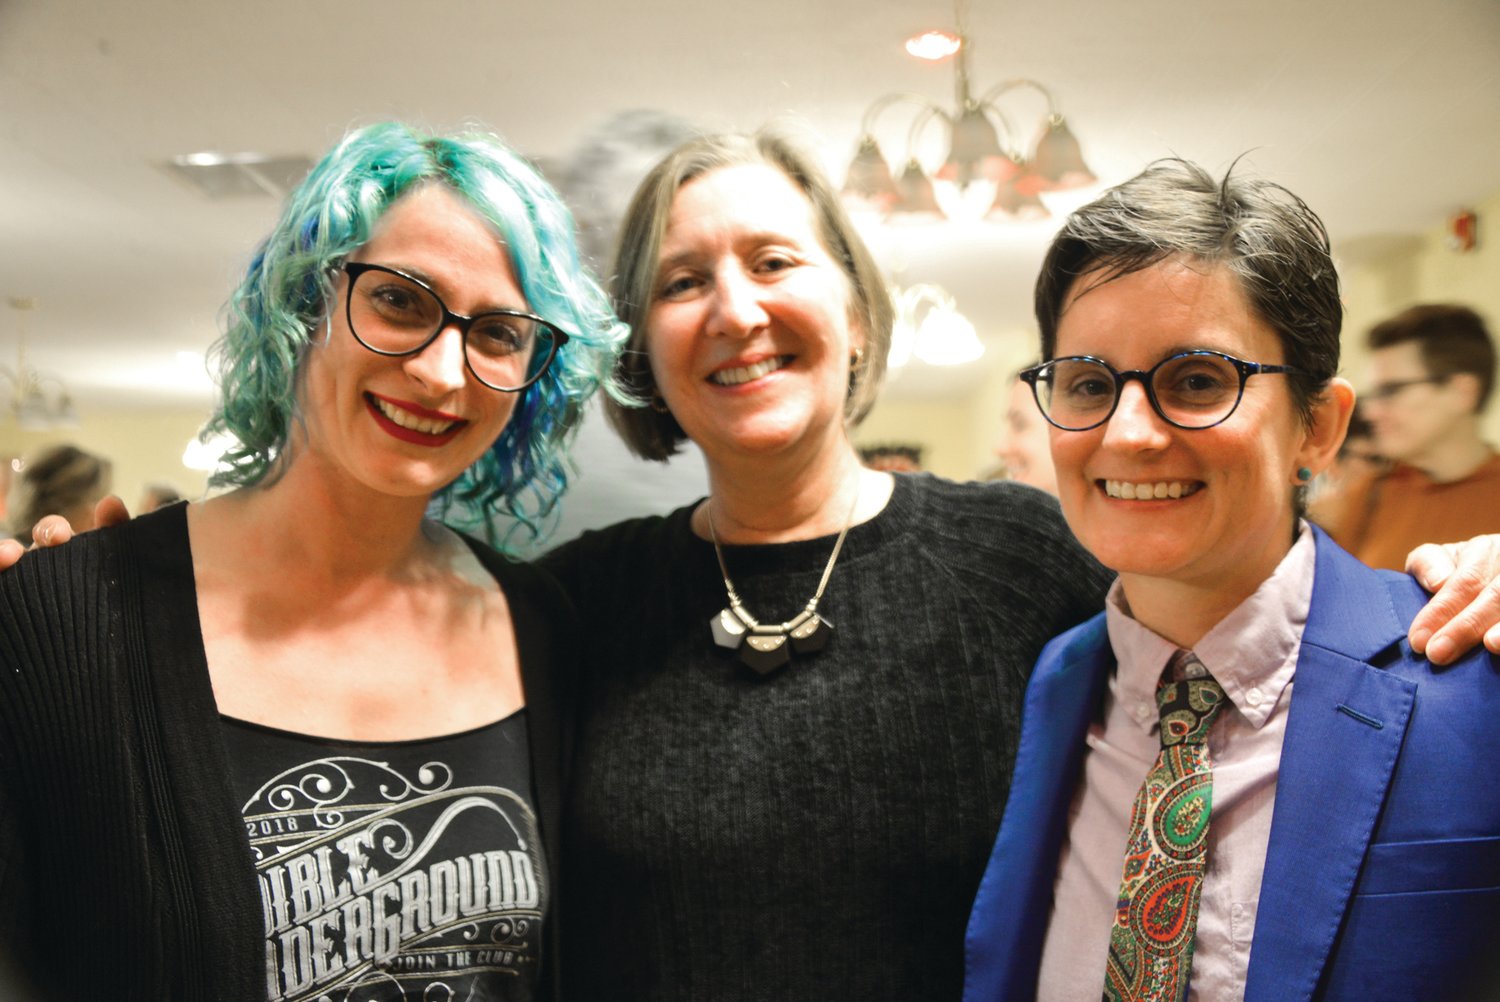 Kimberly McCurley, Beth McCann and Laura Pointon, all of Frenchtown.  Photograph by Chiara Chandoha.